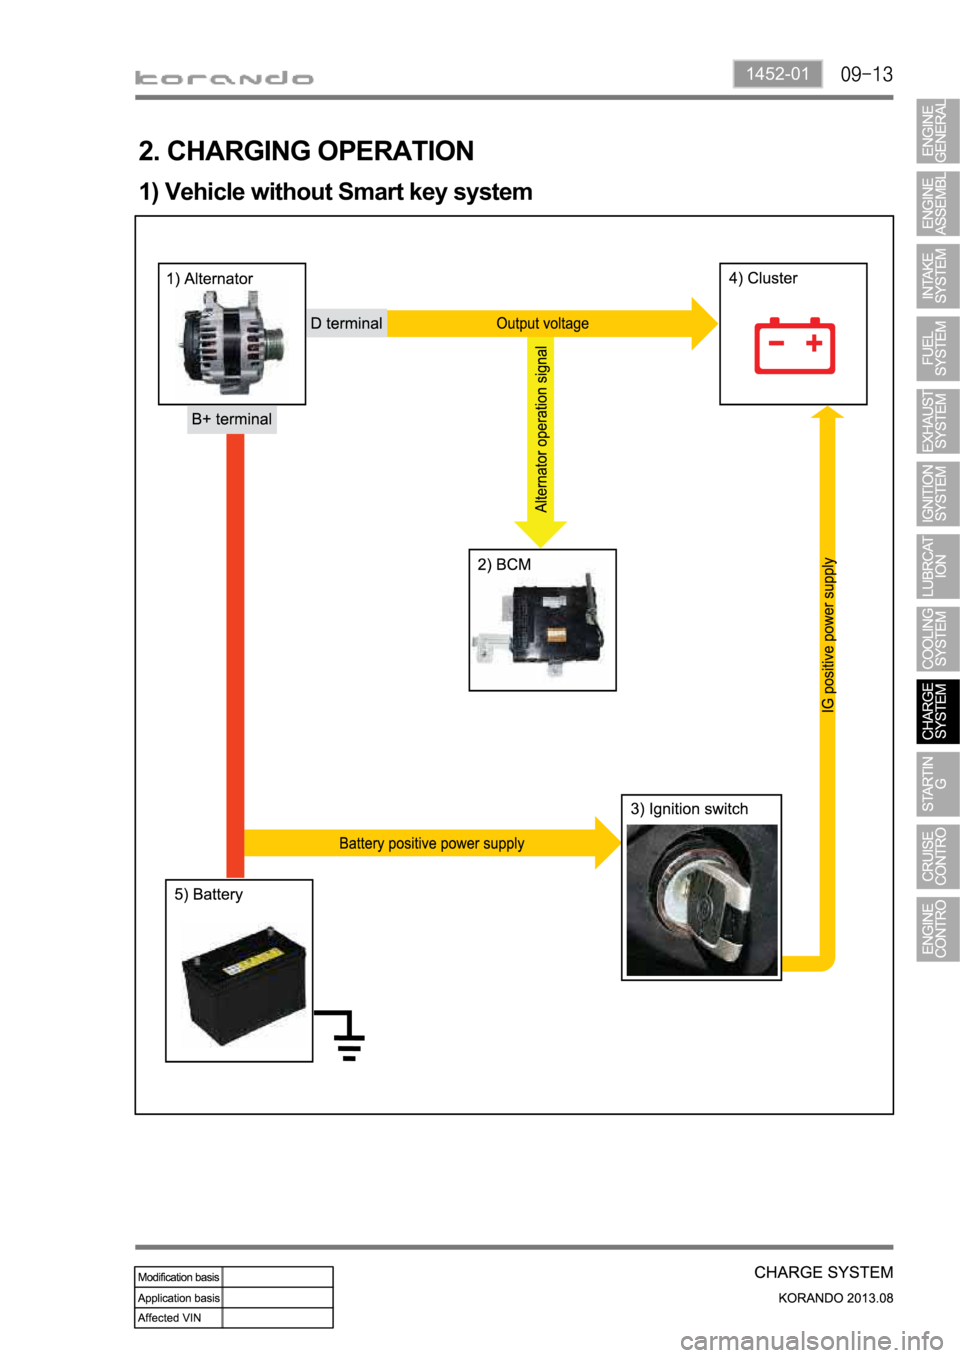 SSANGYONG KORANDO 2013  Service Manual 1452-01
2. CHARGING OPERATION
1) Vehicle without Smart key system 